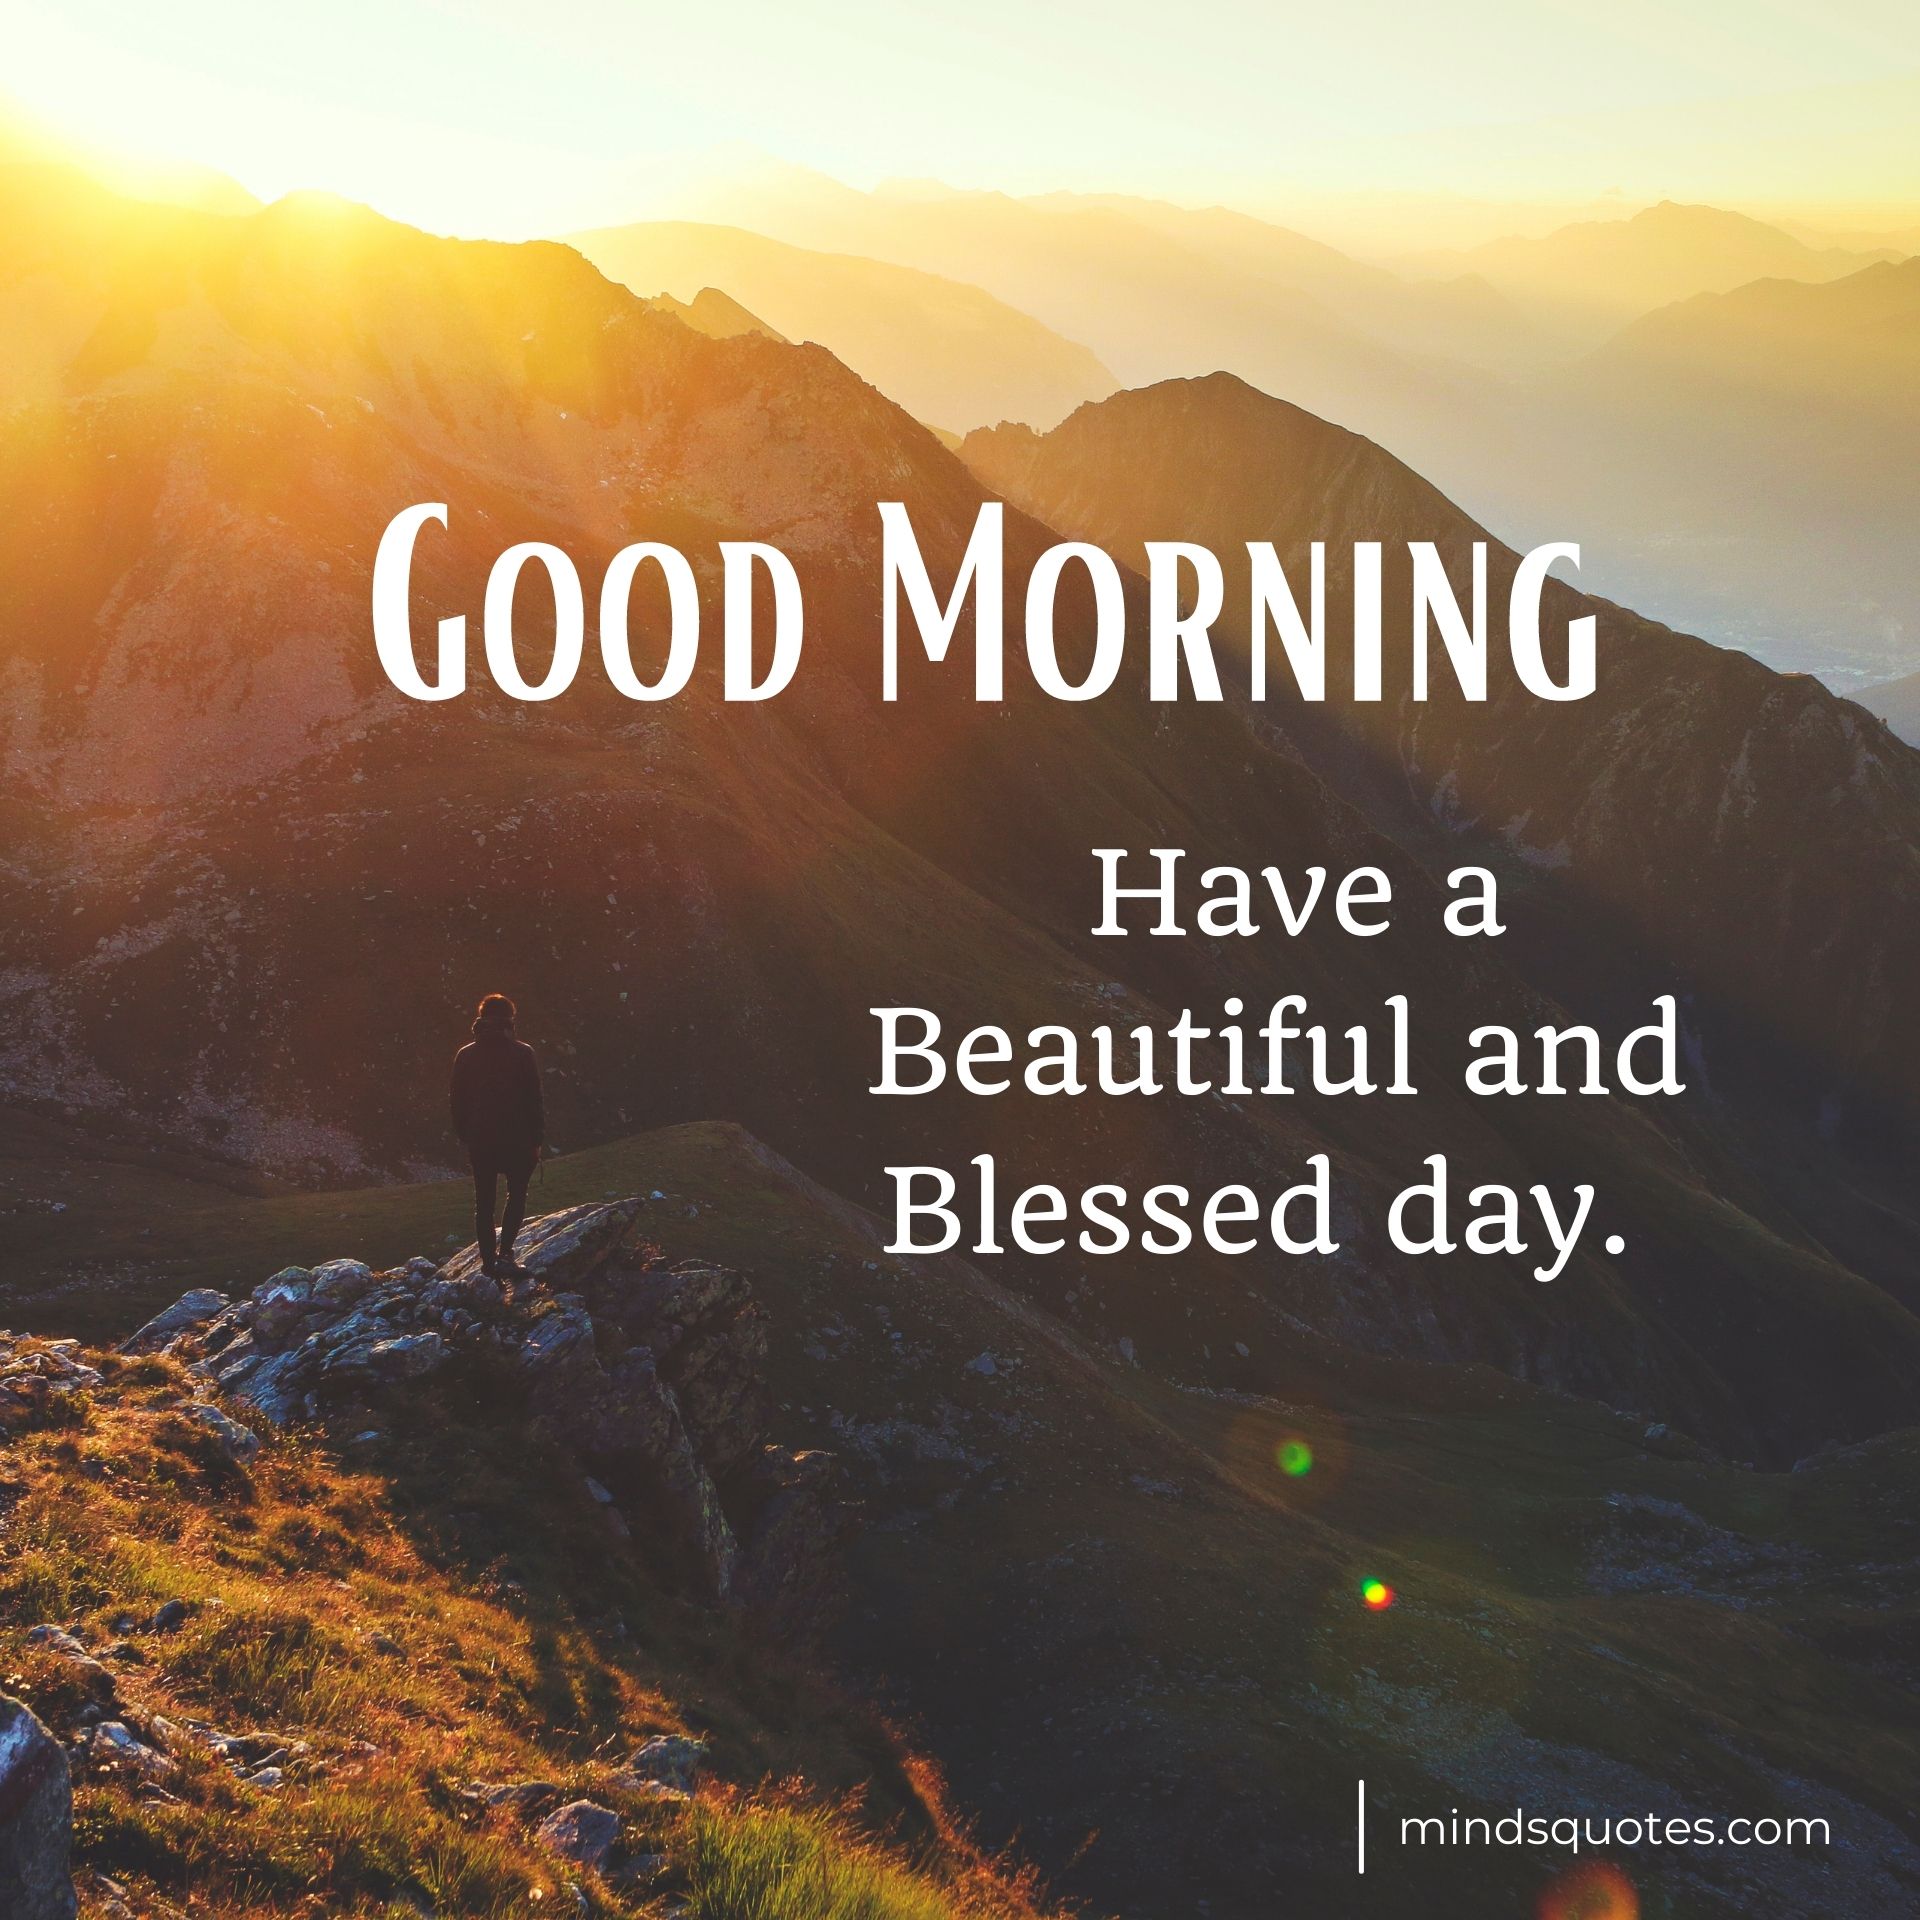 Good Morning Blessings images